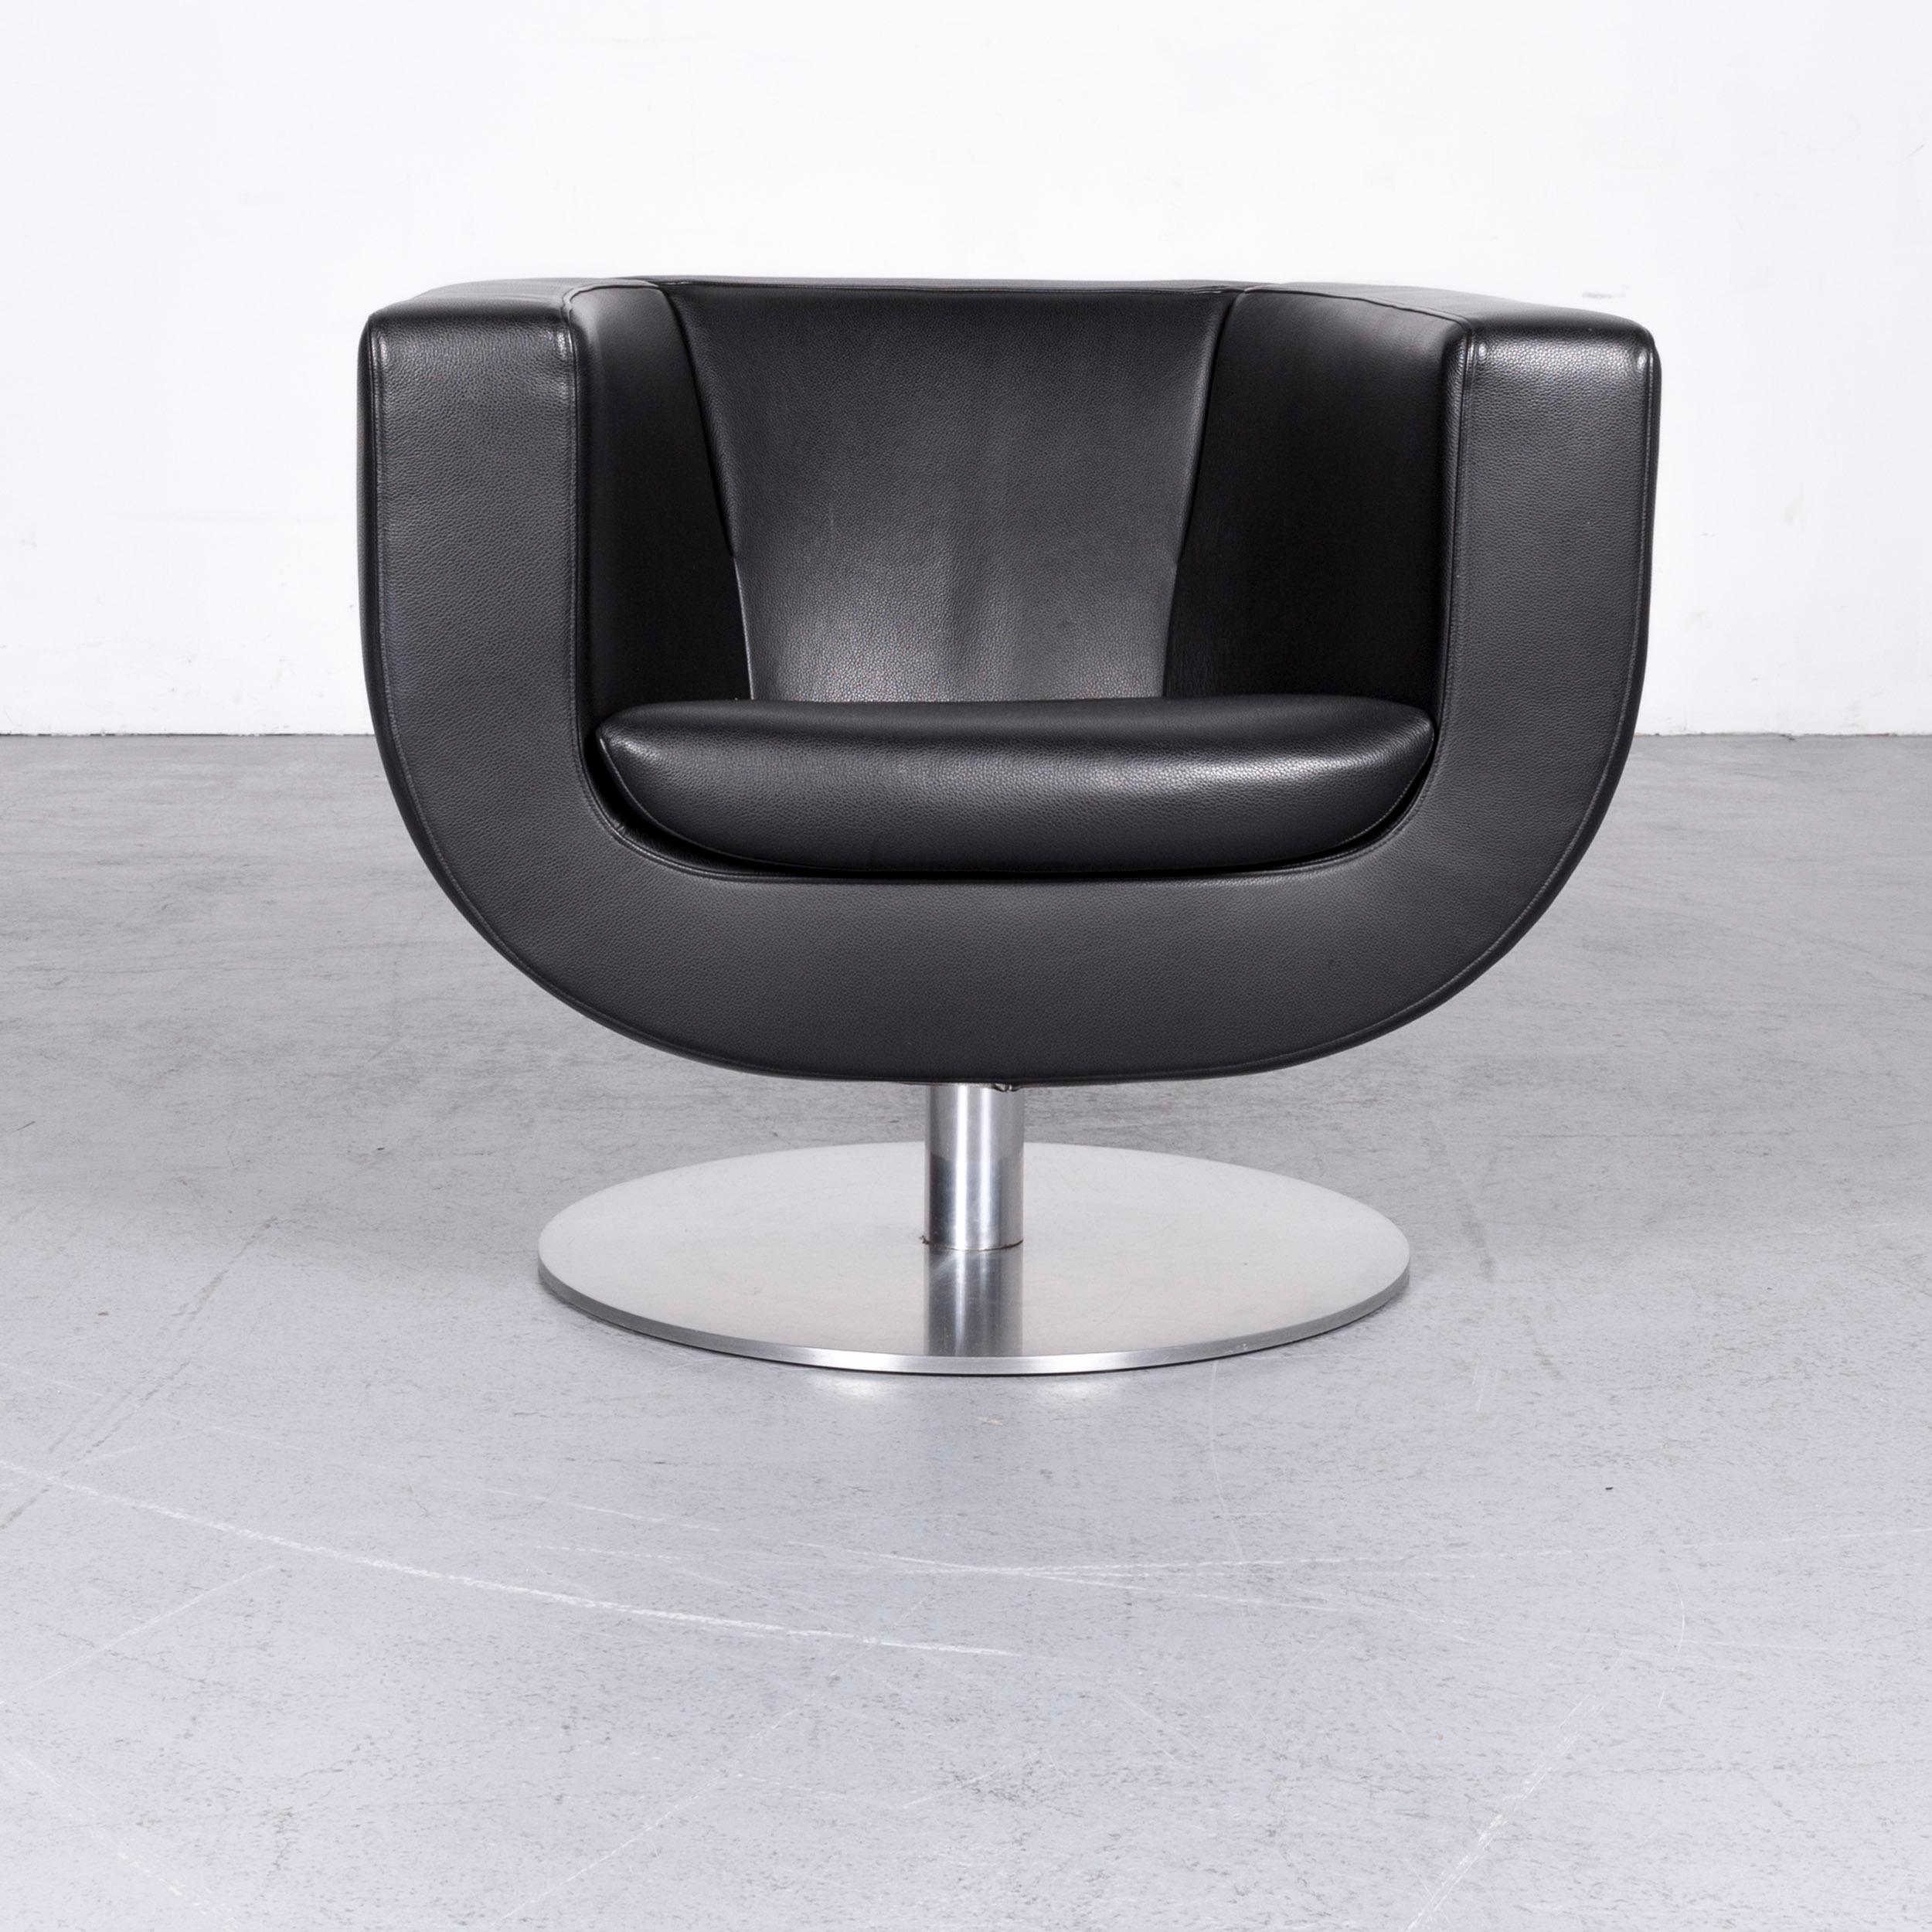 We bring to you a B&B Italia tulip designer leather armchair black chair.